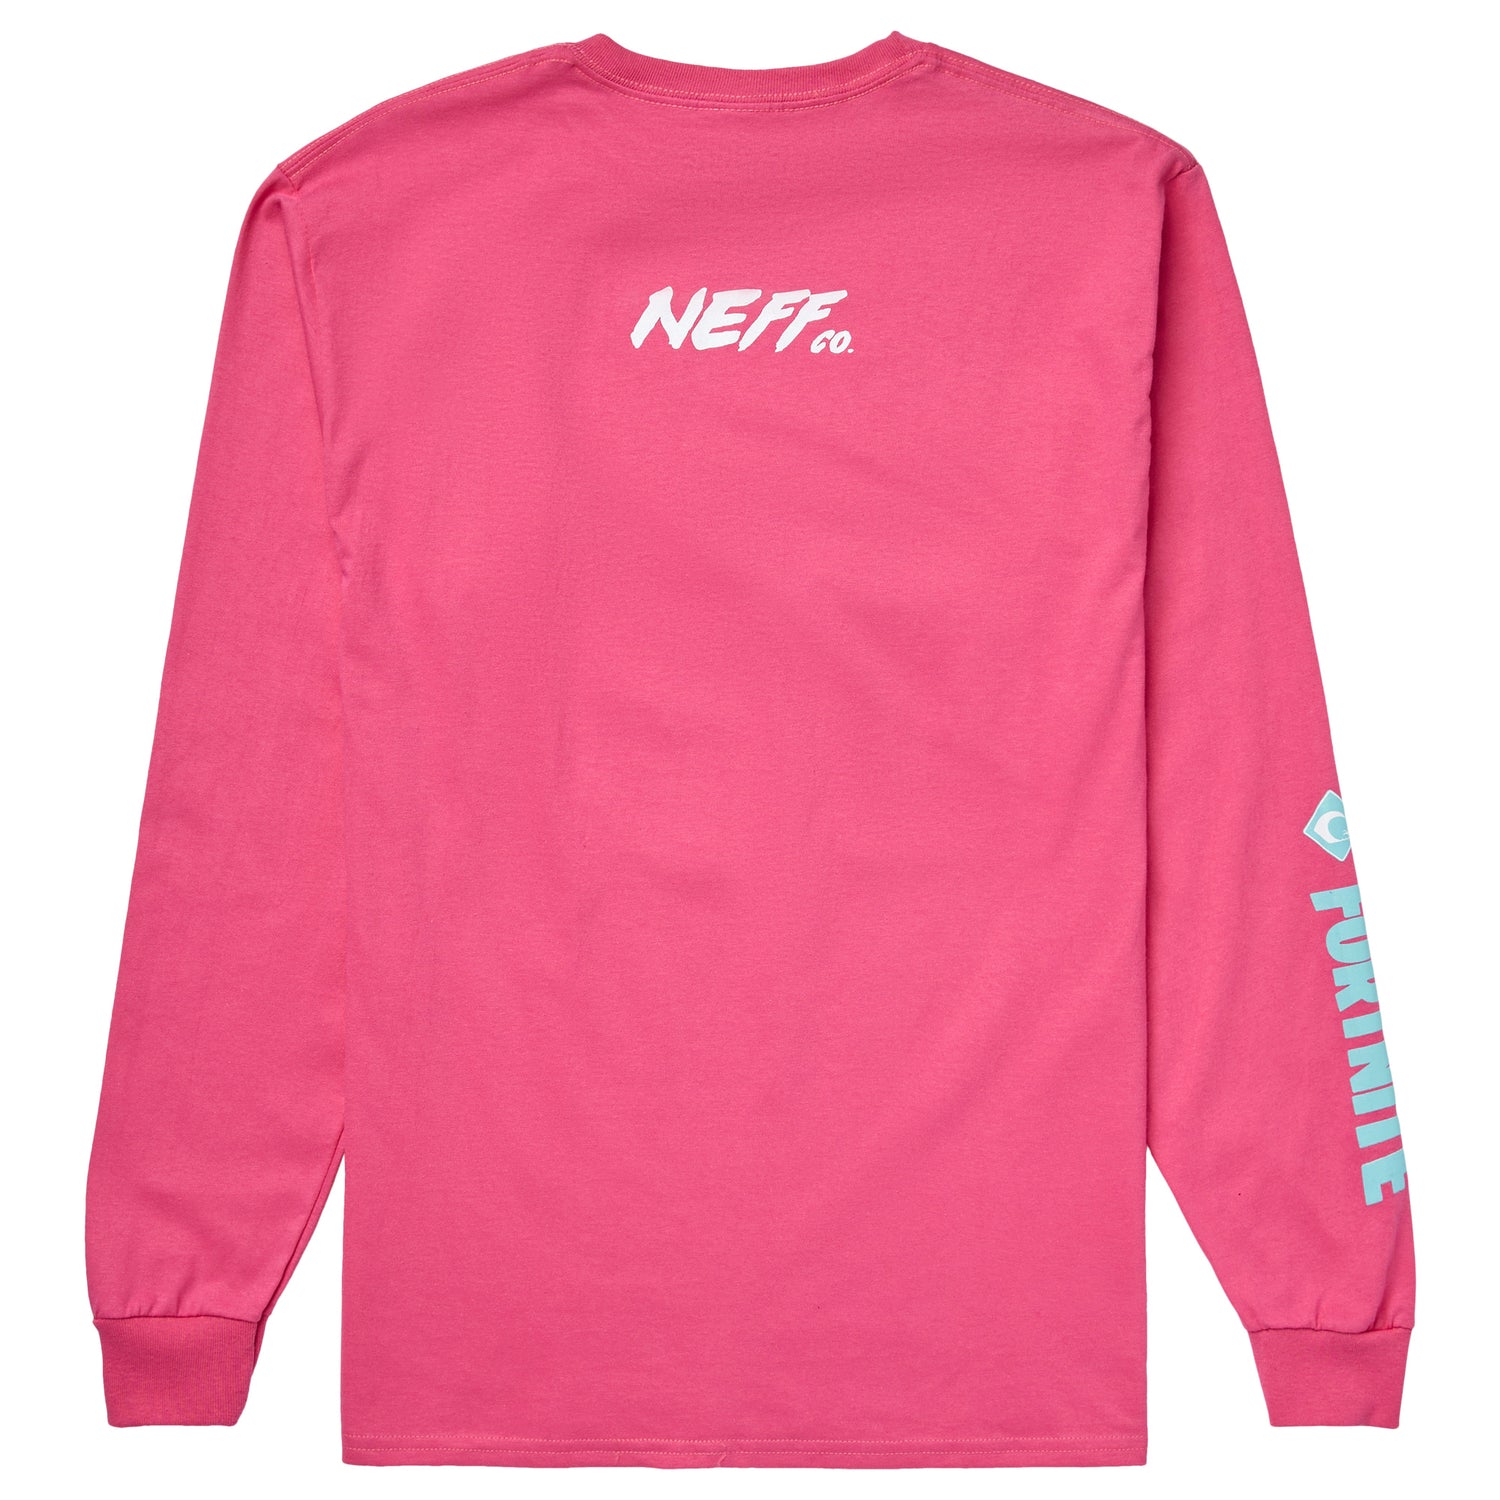 FORTNITE MEOW SURF LONG SLEEVE TEE - BRIGHT PINK